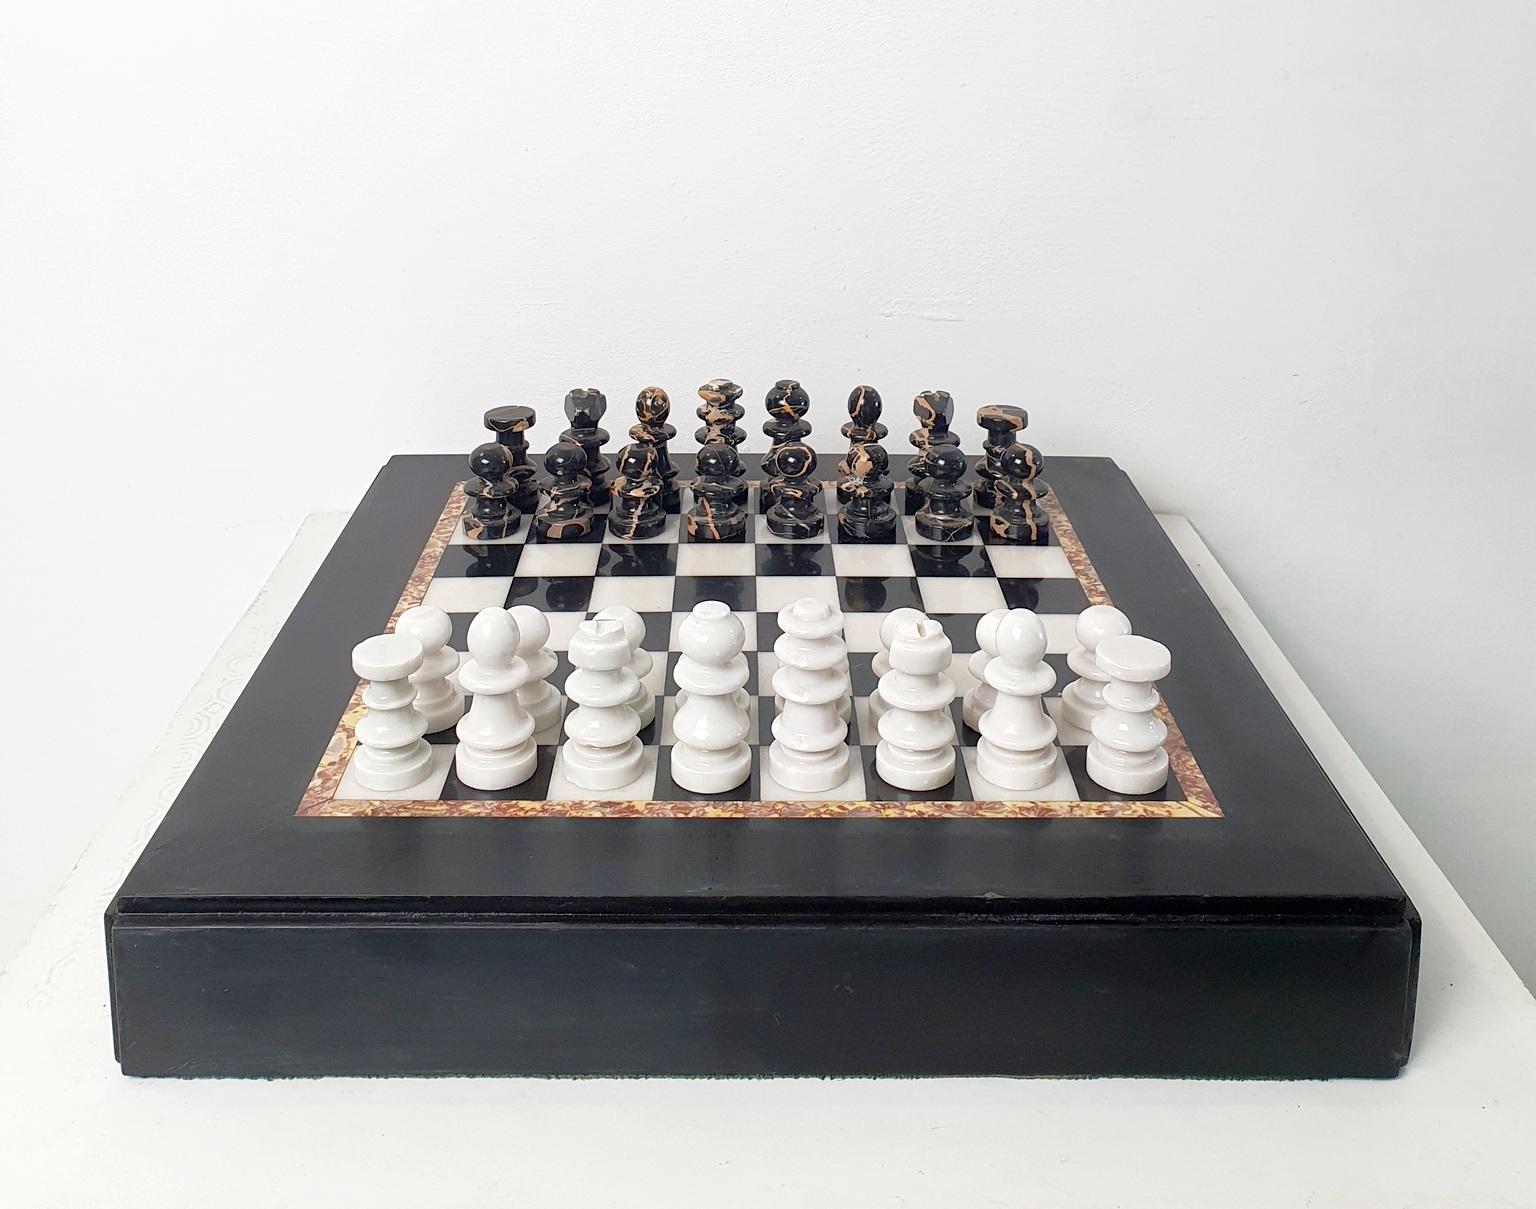 Classic chess board in black and white marble with chess pieces to match in white and black marble as well. 